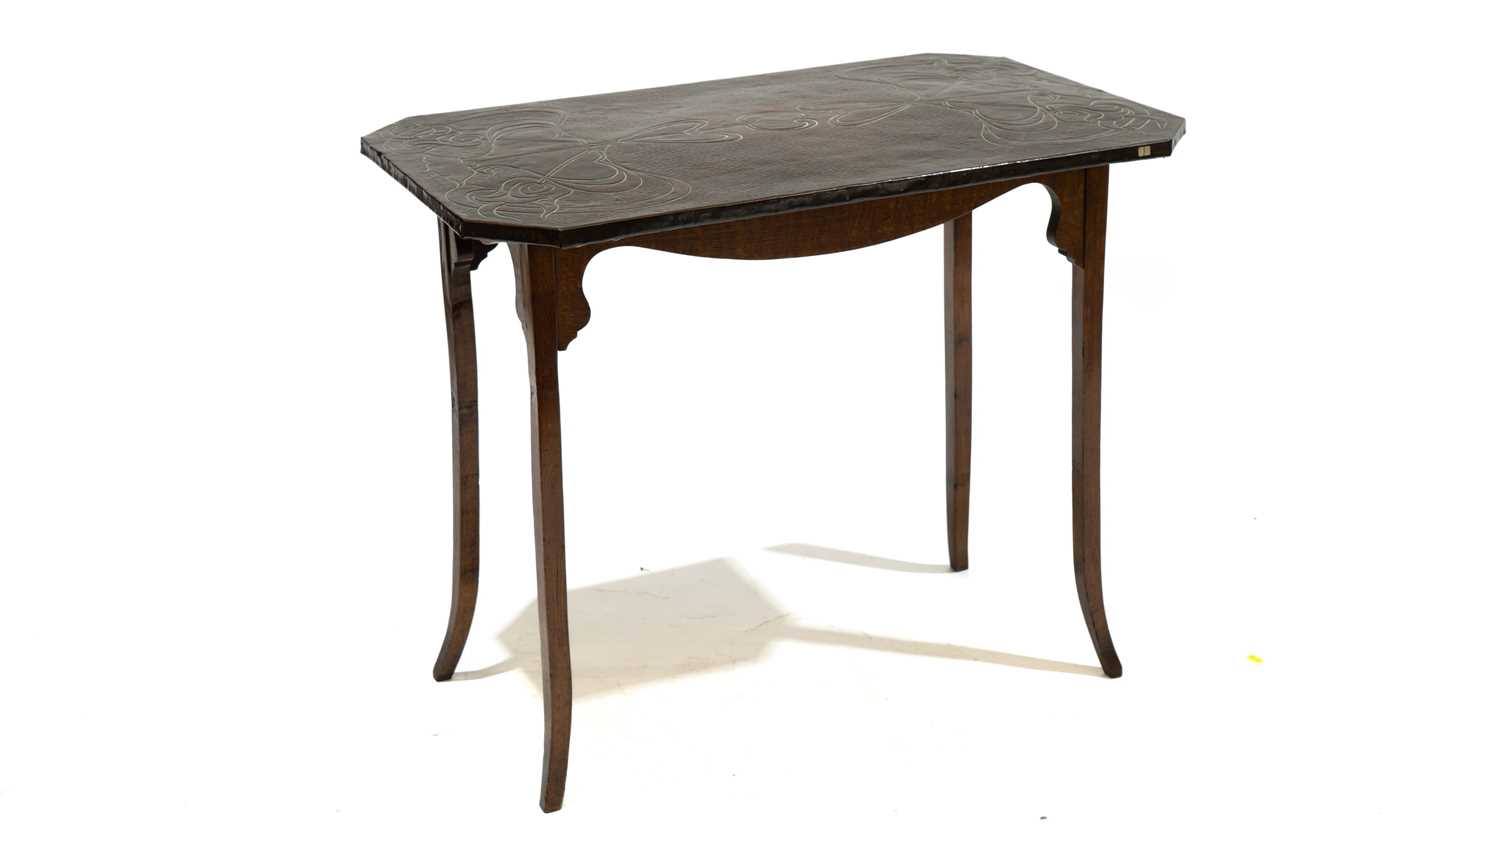 Lot 975 - An Arts & Crafts copper and oak side table, c1900